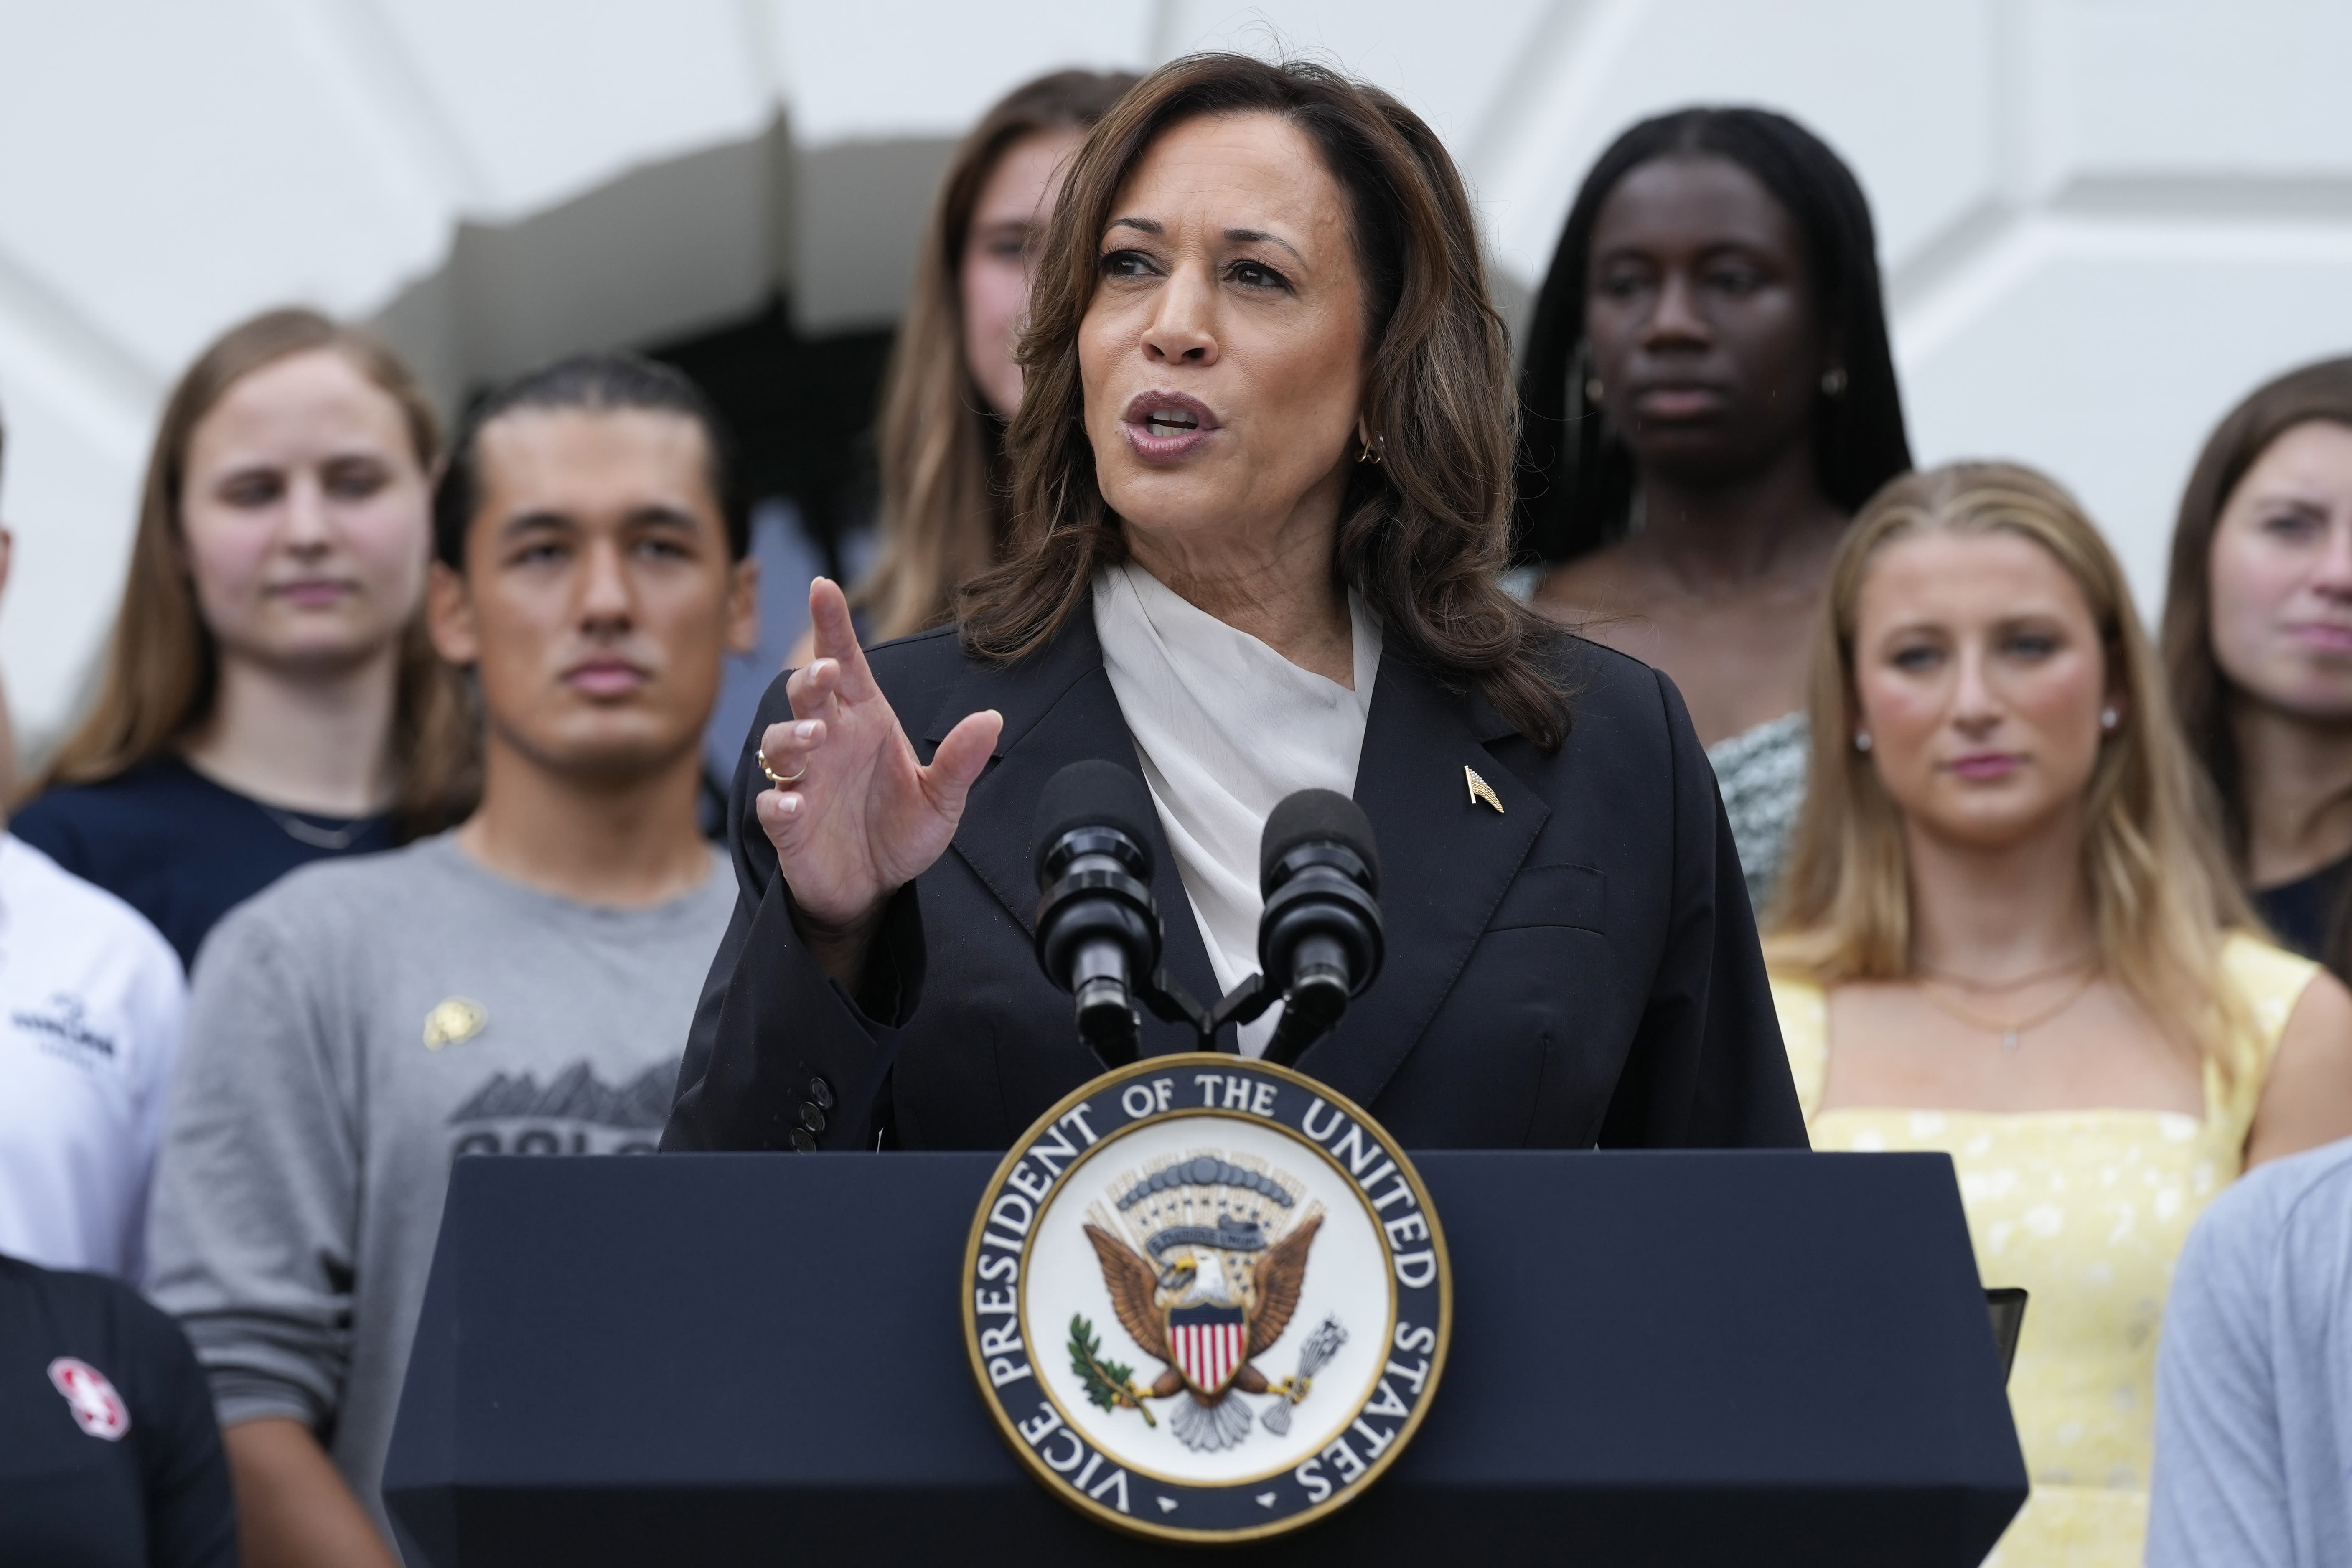 Harris converts Biden campaign into her own